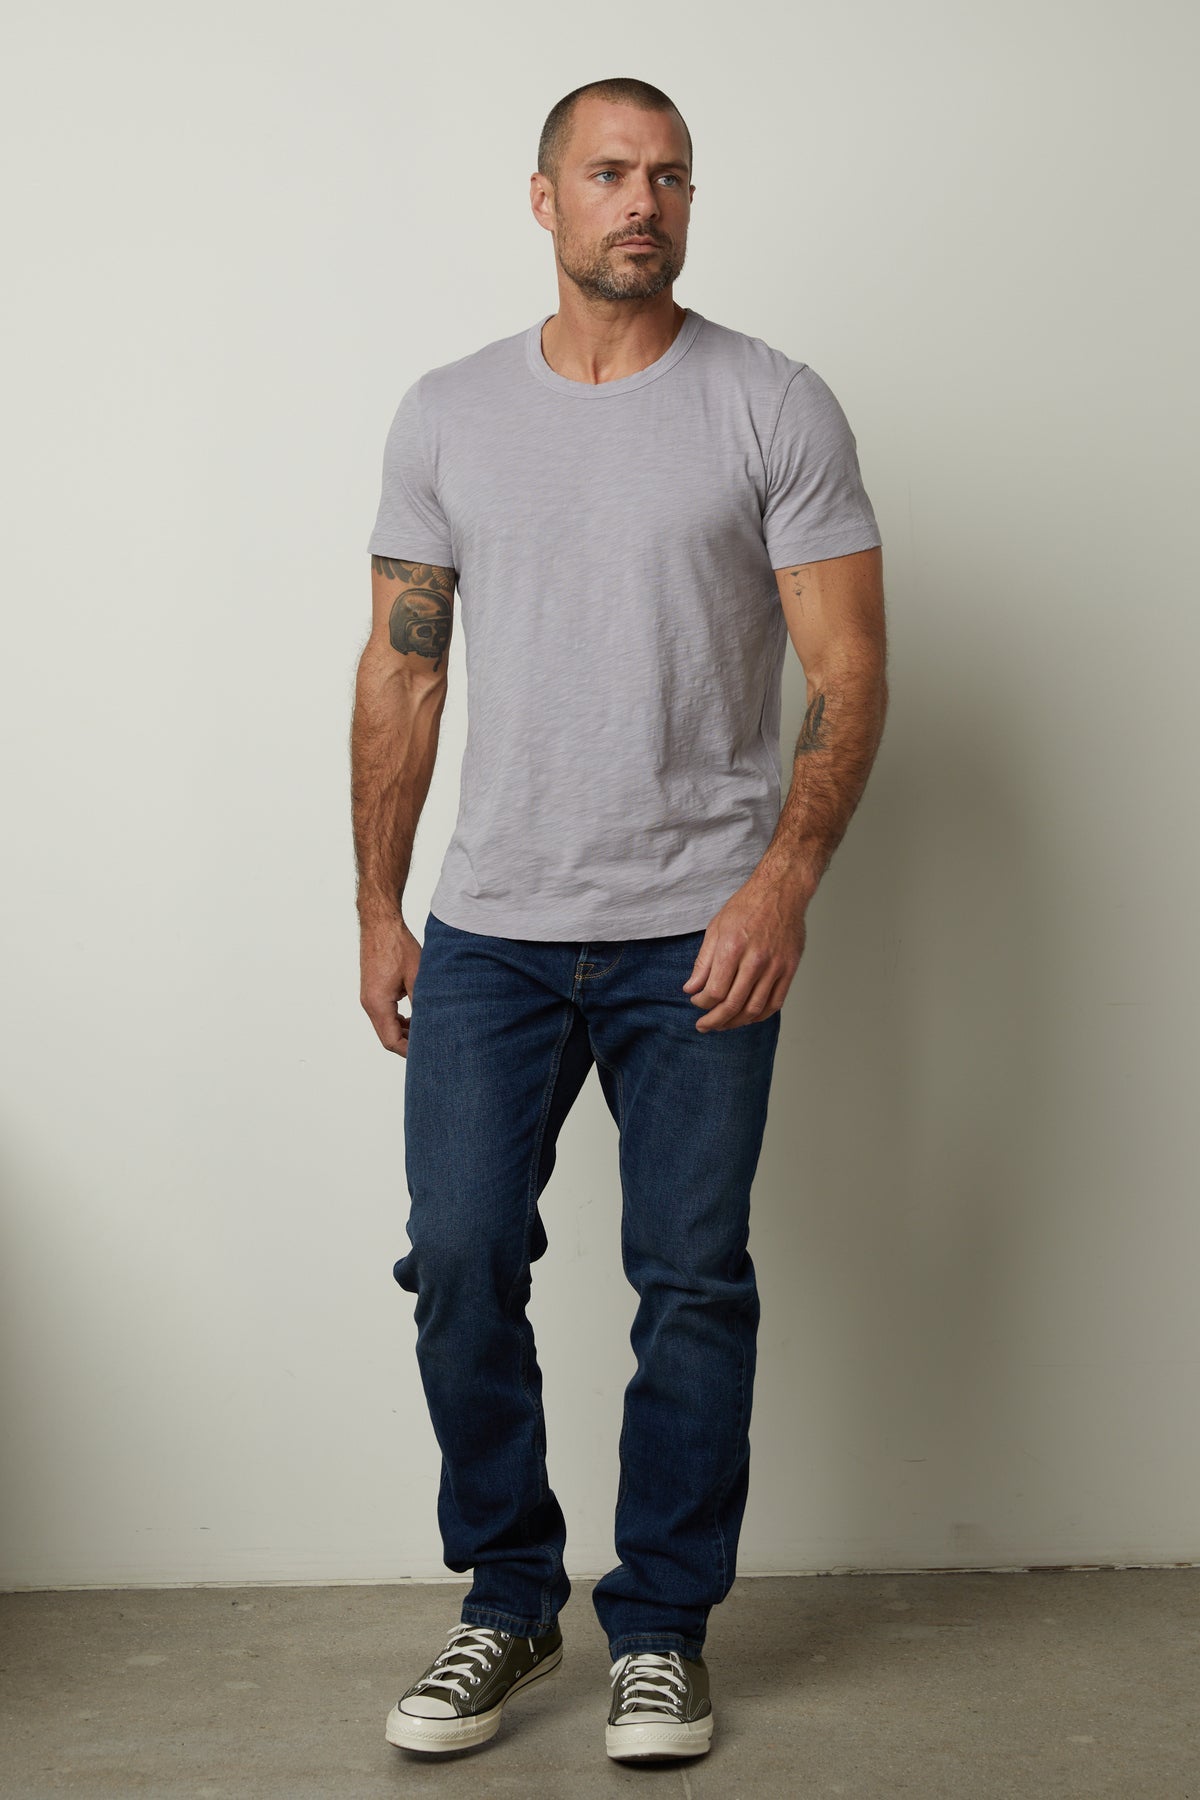   A man standing in a room wearing AMARO CREW NECK SLUB TEE by Velvet by Graham & Spencer jeans and a t - shirt. 